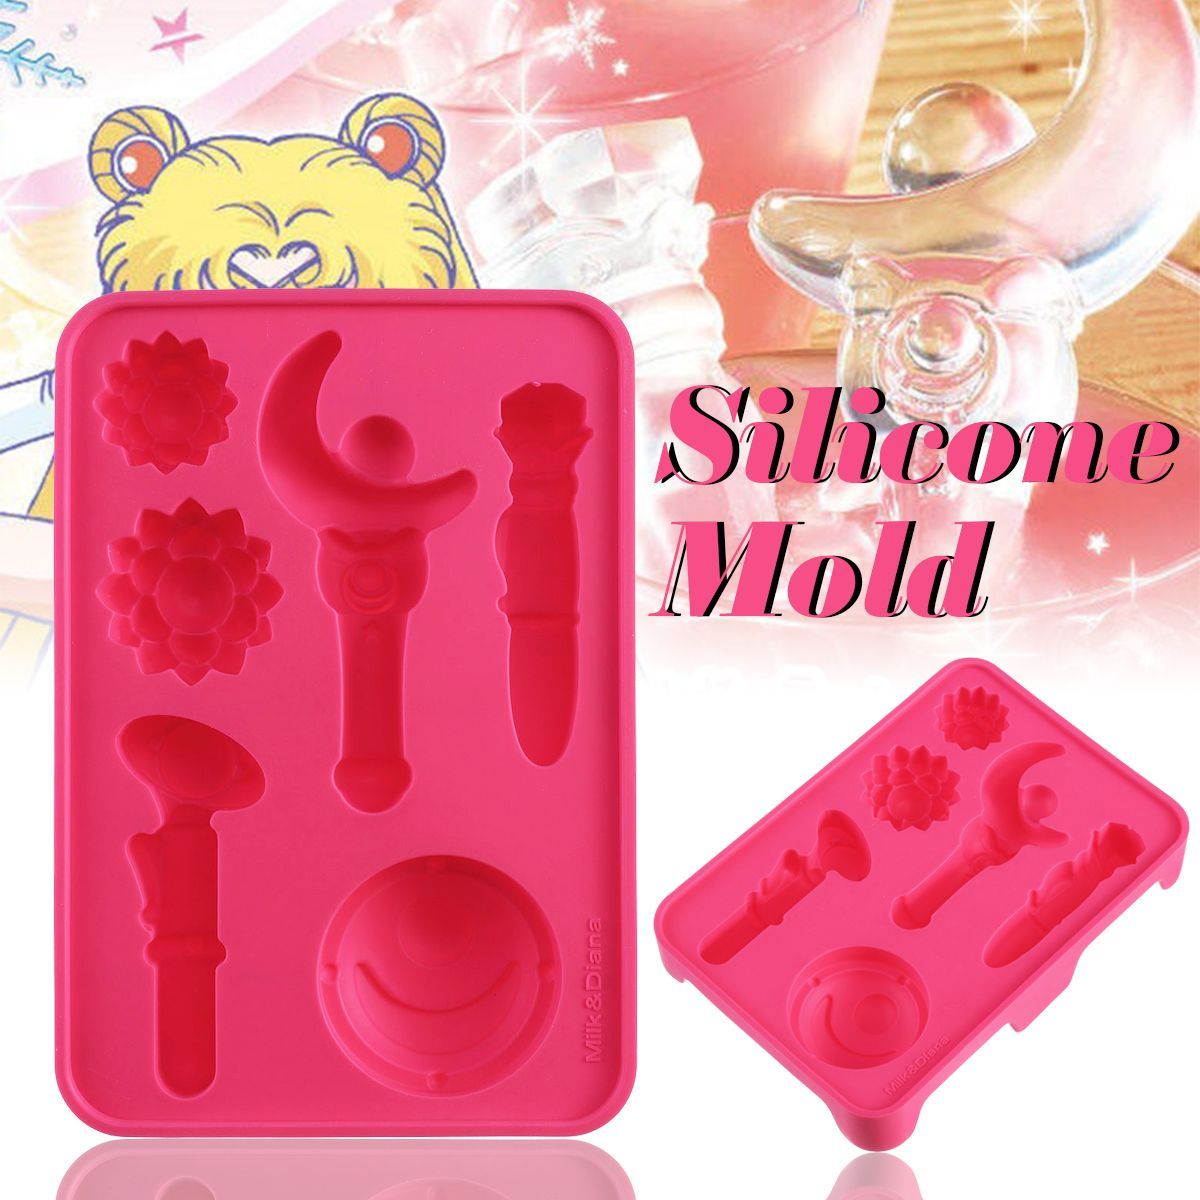 DIY-Silicone-Mold-Chocolate-Ice-Cube-Solid-Mould-Gift-Props-For-3D-Sailor-Moon-1601356